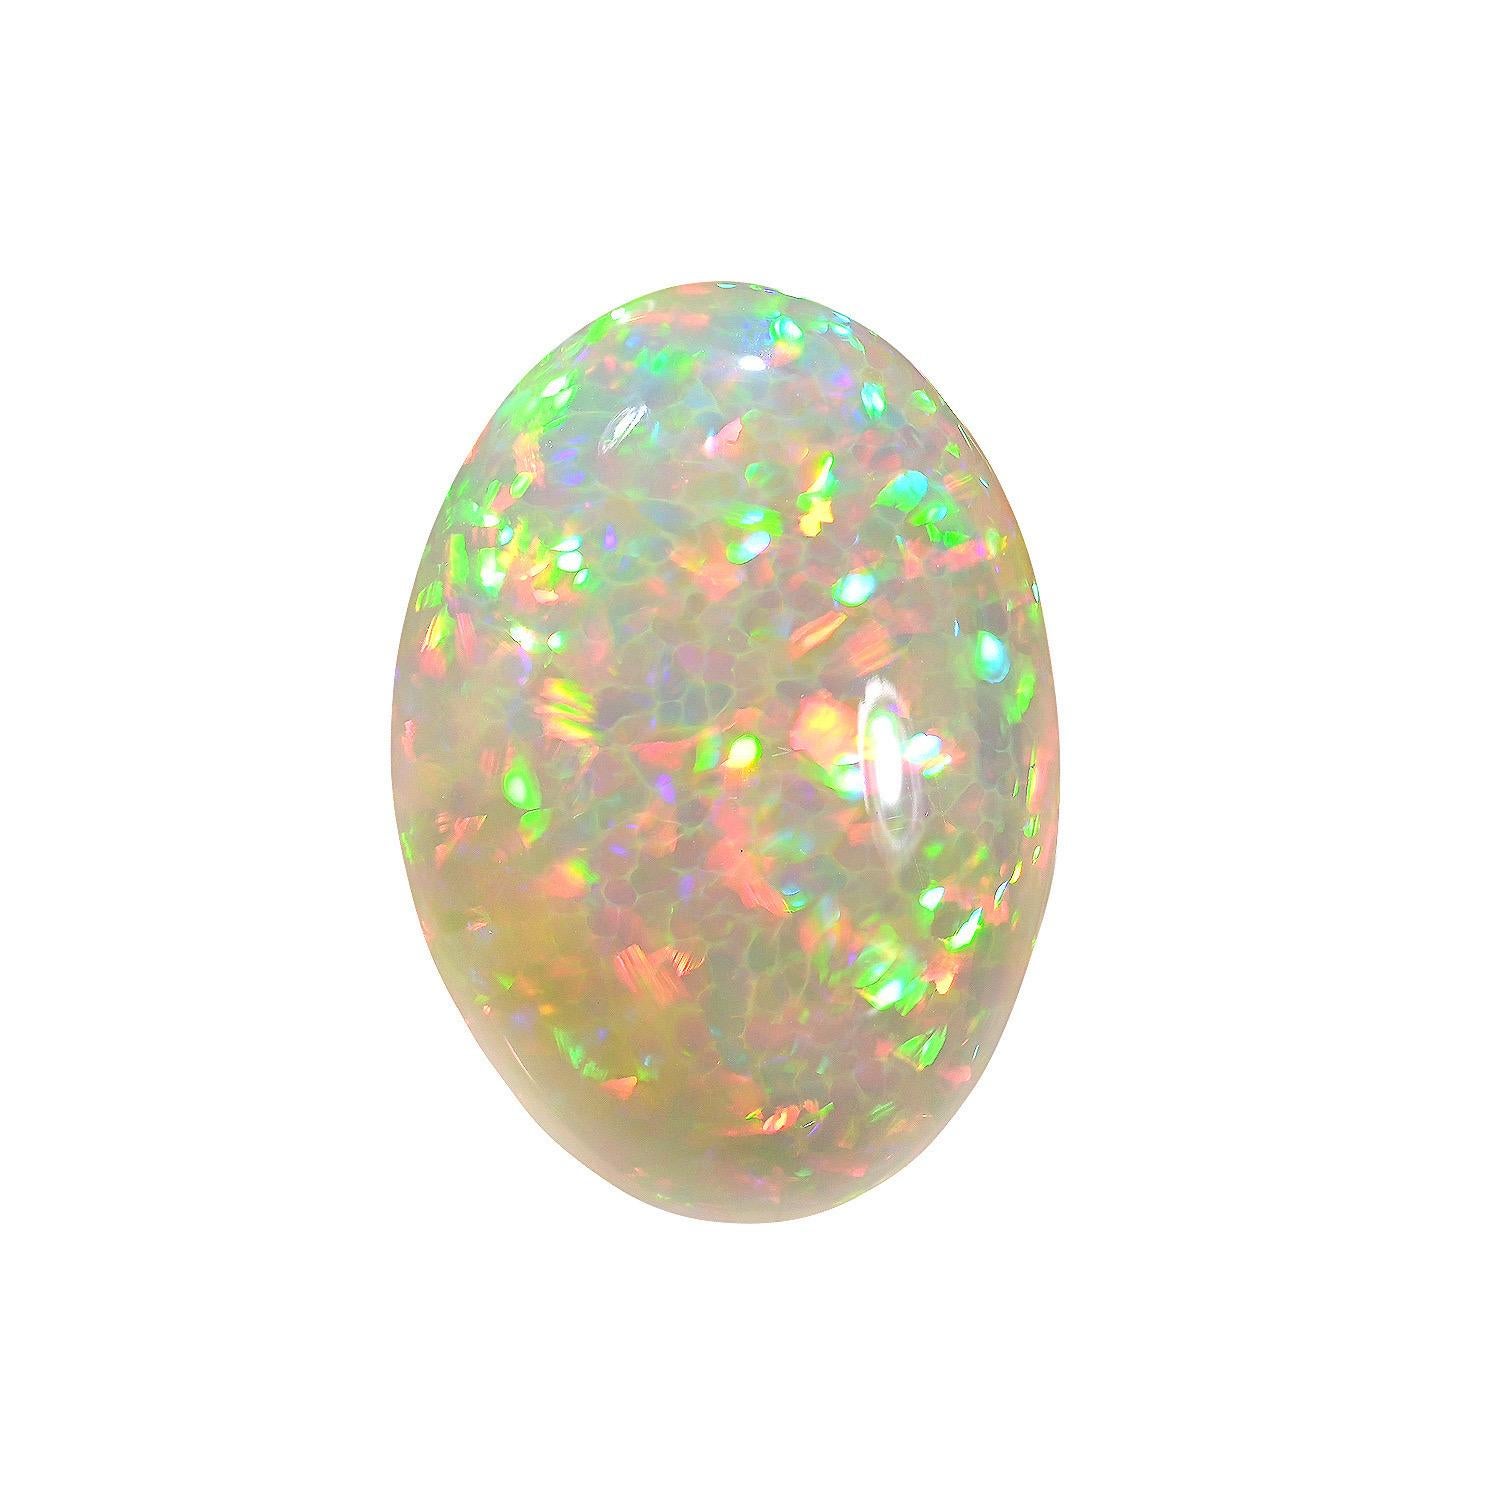 Natural 25.67 Carat oval Ethiopian Opal loose gemstone, offered unmounted to a fine gem collector.
Returns are accepted and paid by us within 7 days of delivery.
We offer supreme custom jewelry work upon request. Please contact us for more